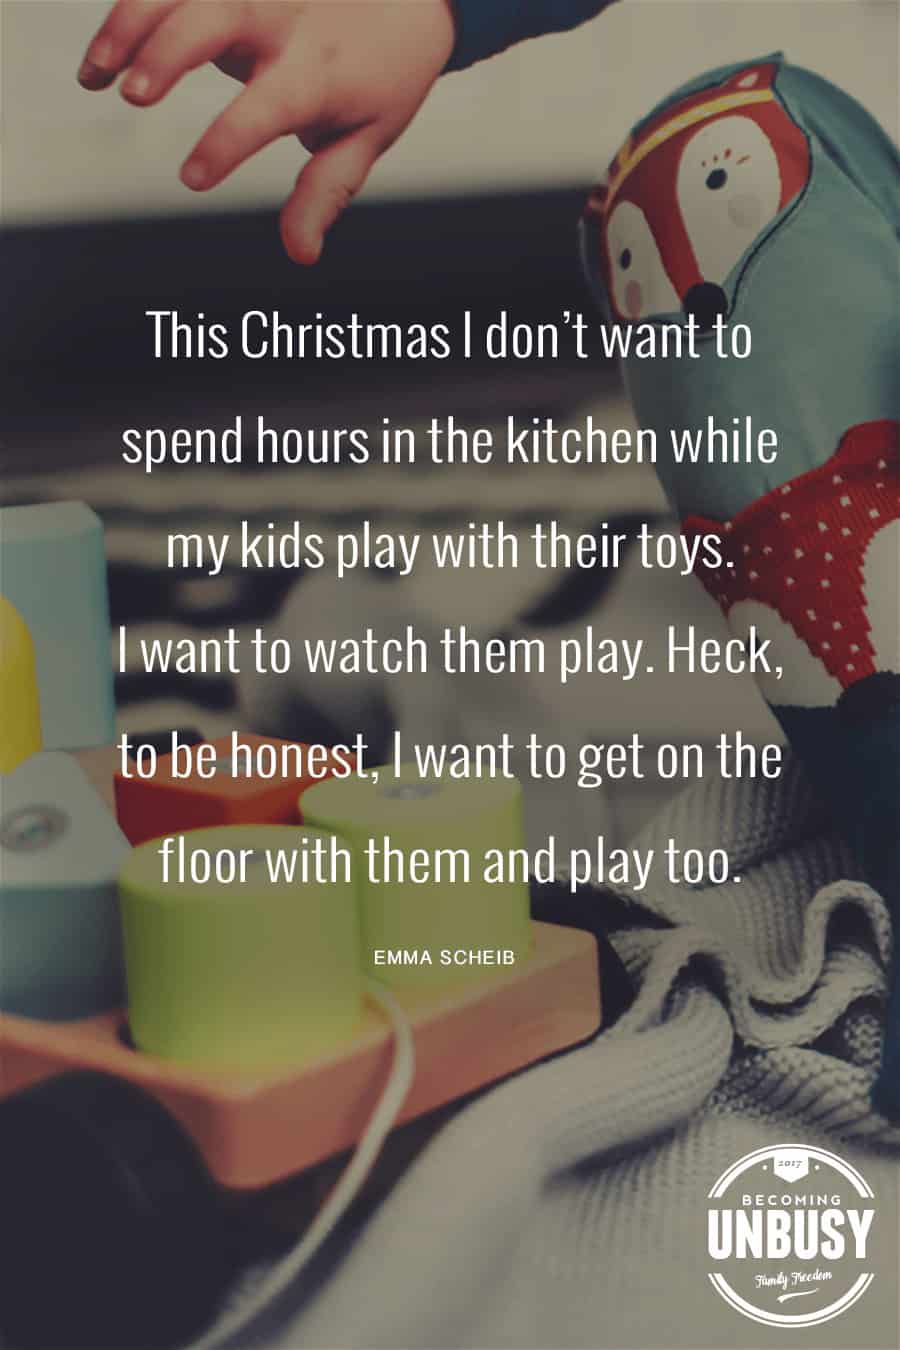 This Christmas I don’t want to spend hours in the kitchen while my kids play with their toys. I want to watch them play. Heck, to be honest, I want to get on the floor with them and play too. #quote #BecomingUnBusy #Christmas *Loving this quote and this site